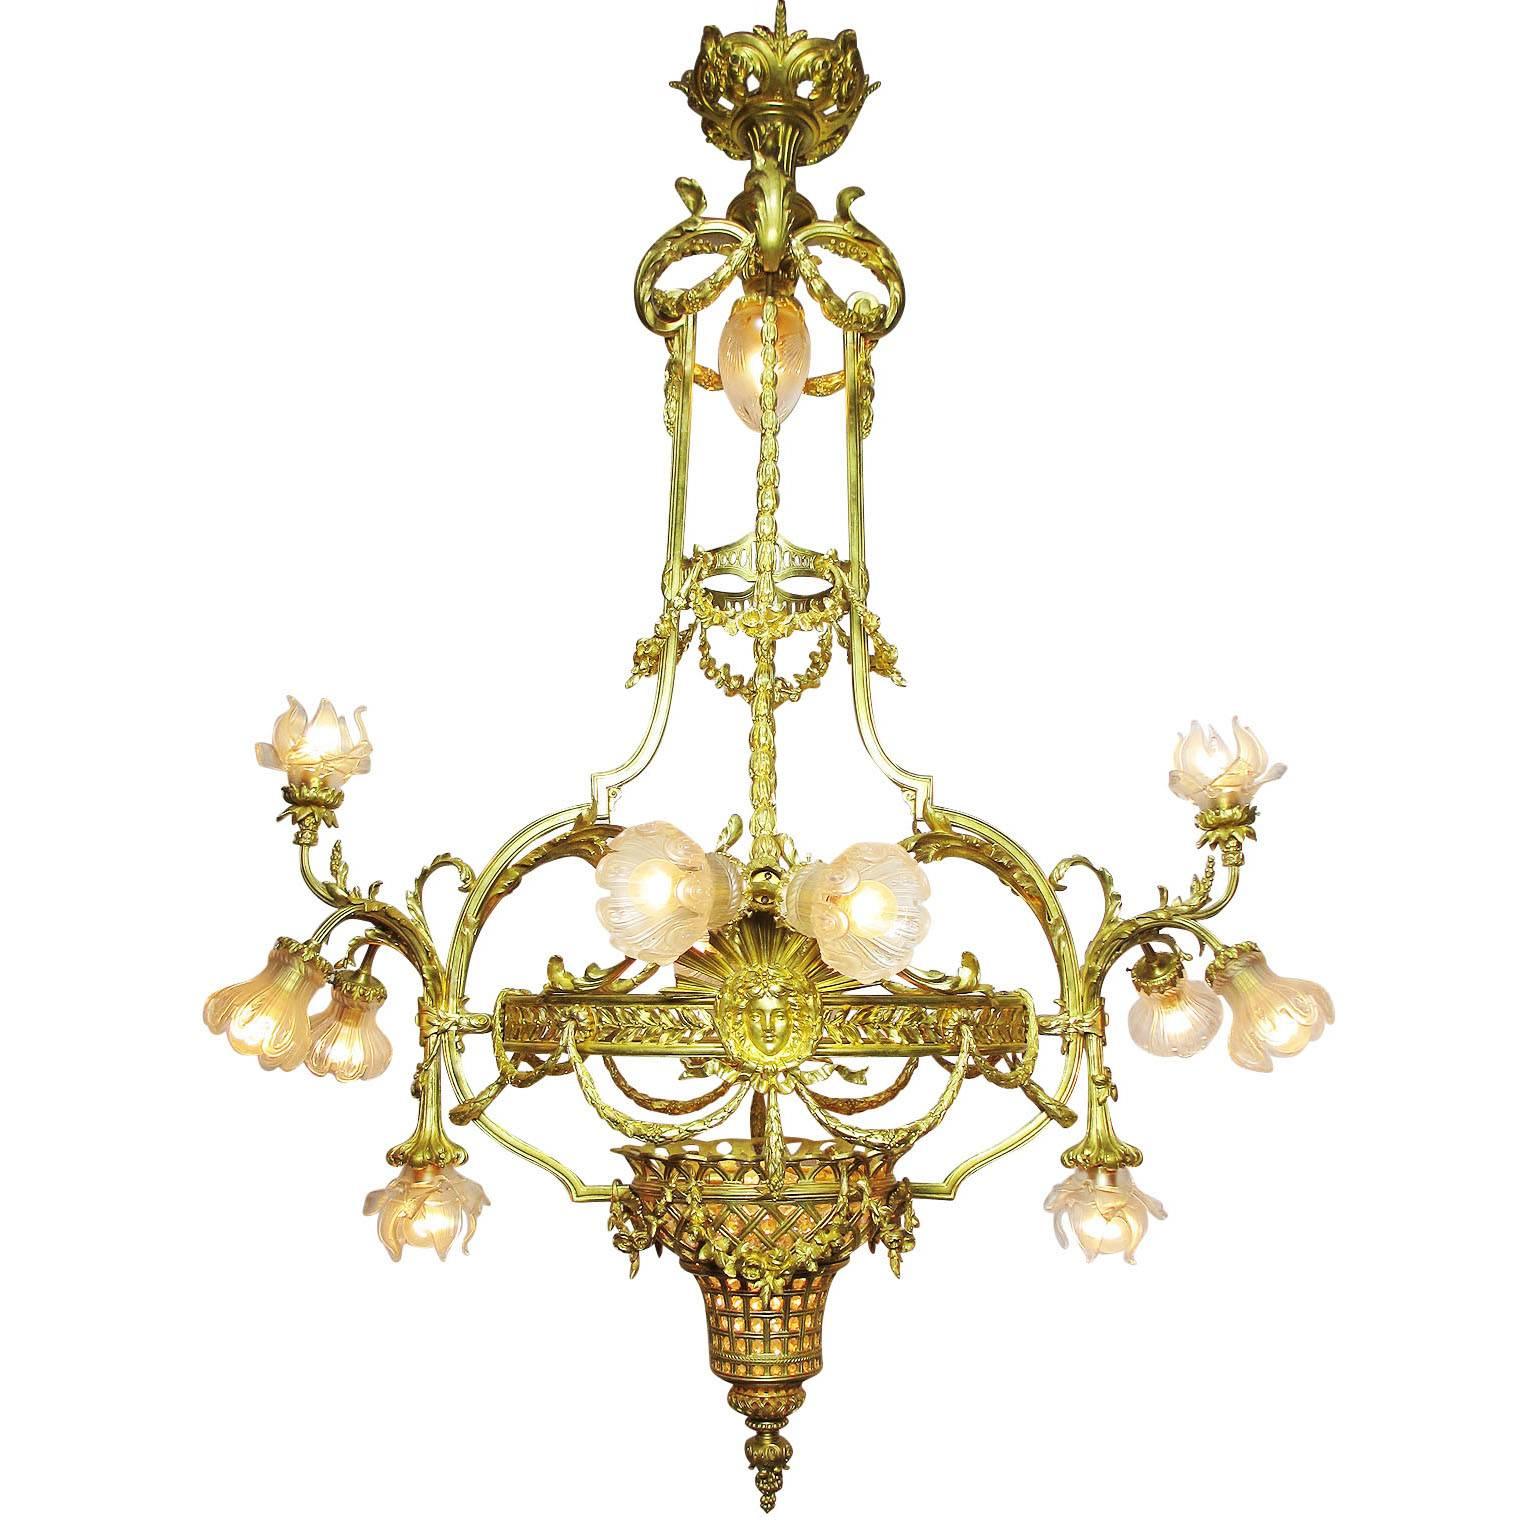 Palatial French 19th/20th Century Louis XIV Style Gilt-Bronze Orante Chandelier  For Sale